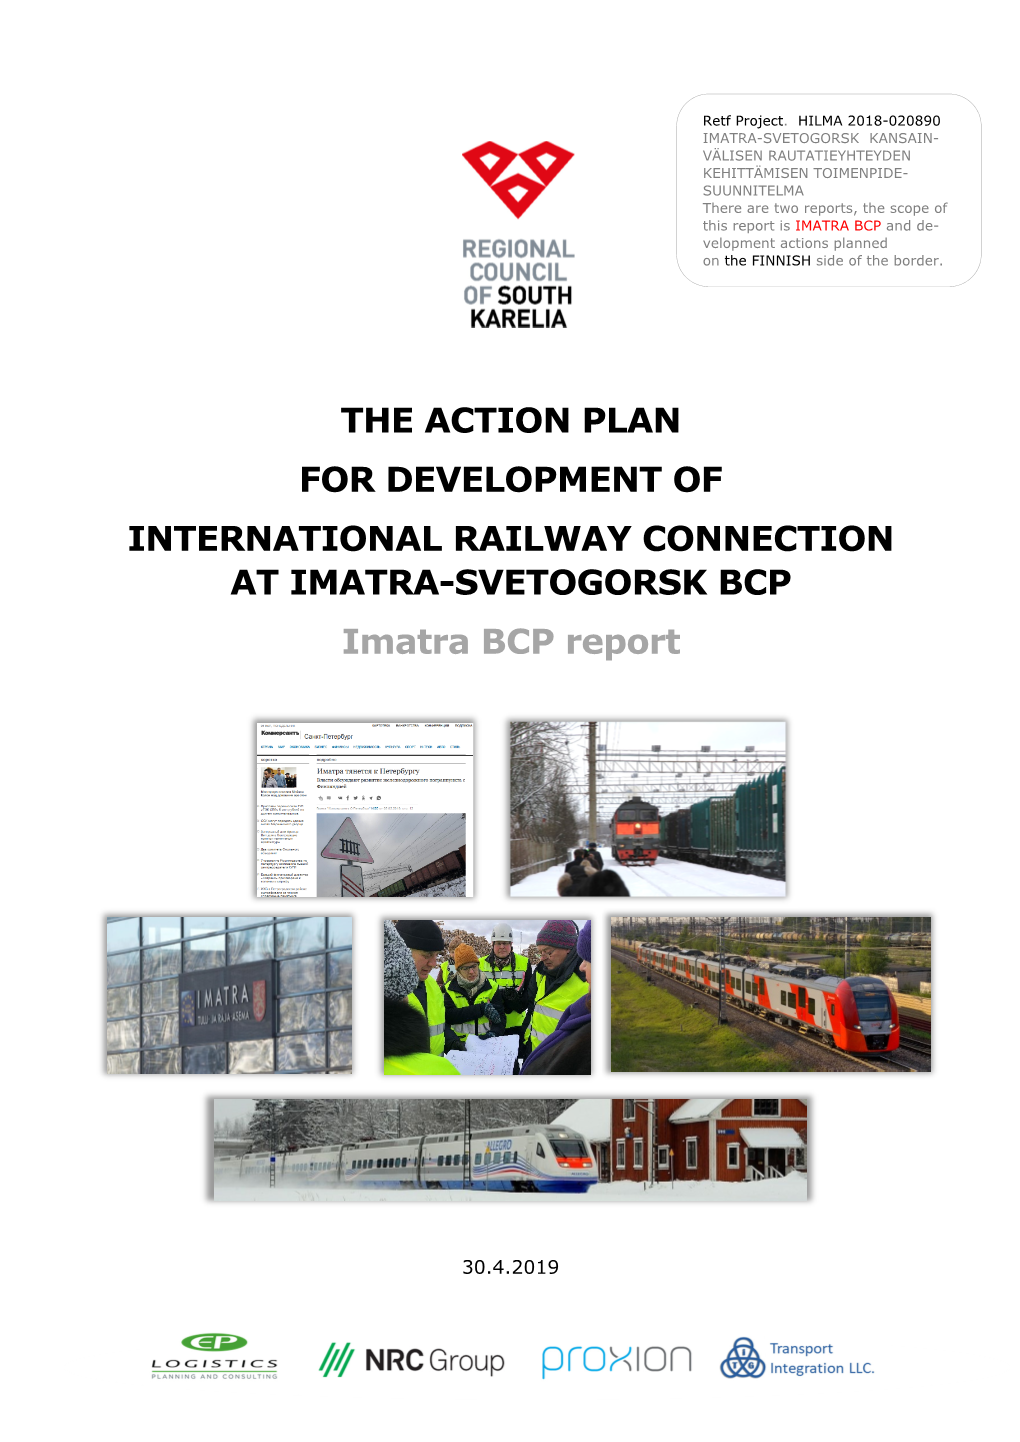 THE ACTION PLAN for DEVELOPMENT of INTERNATIONAL RAILWAY CONNECTION at IMATRA-SVETOGORSK BCP Imatra BCP Report